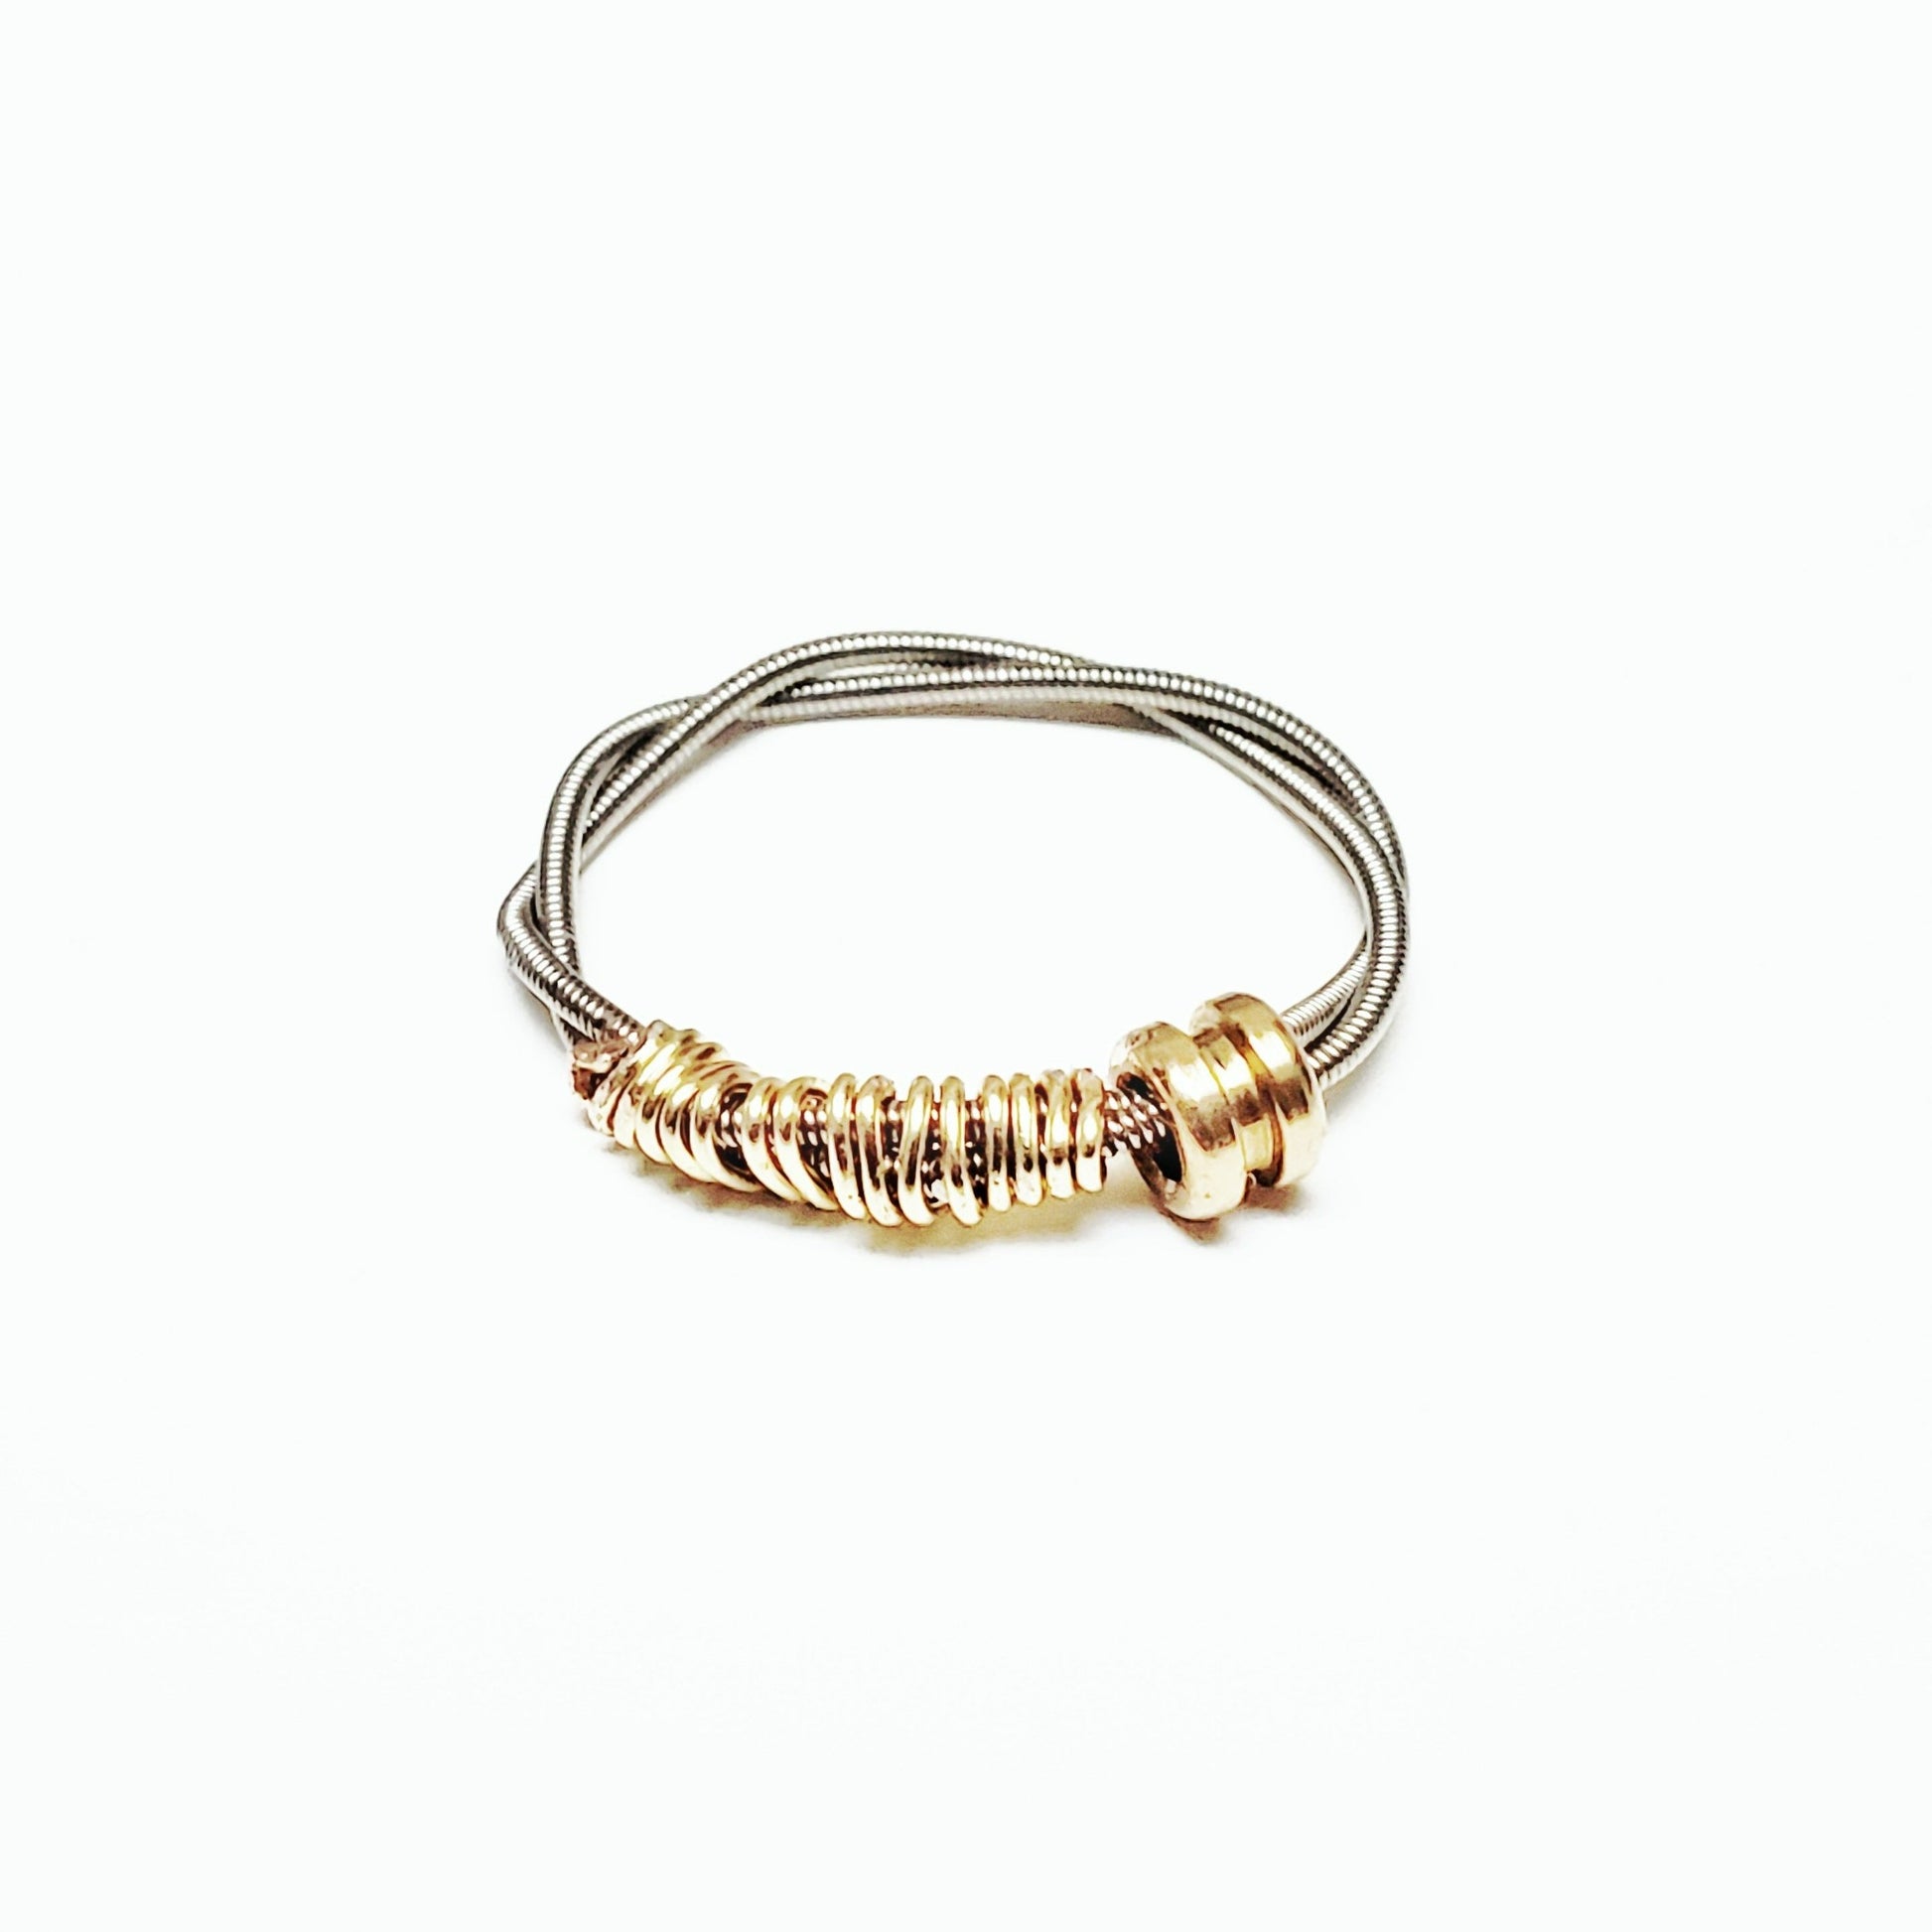 guitar string fidget ring with a gold coloured ballend - white background